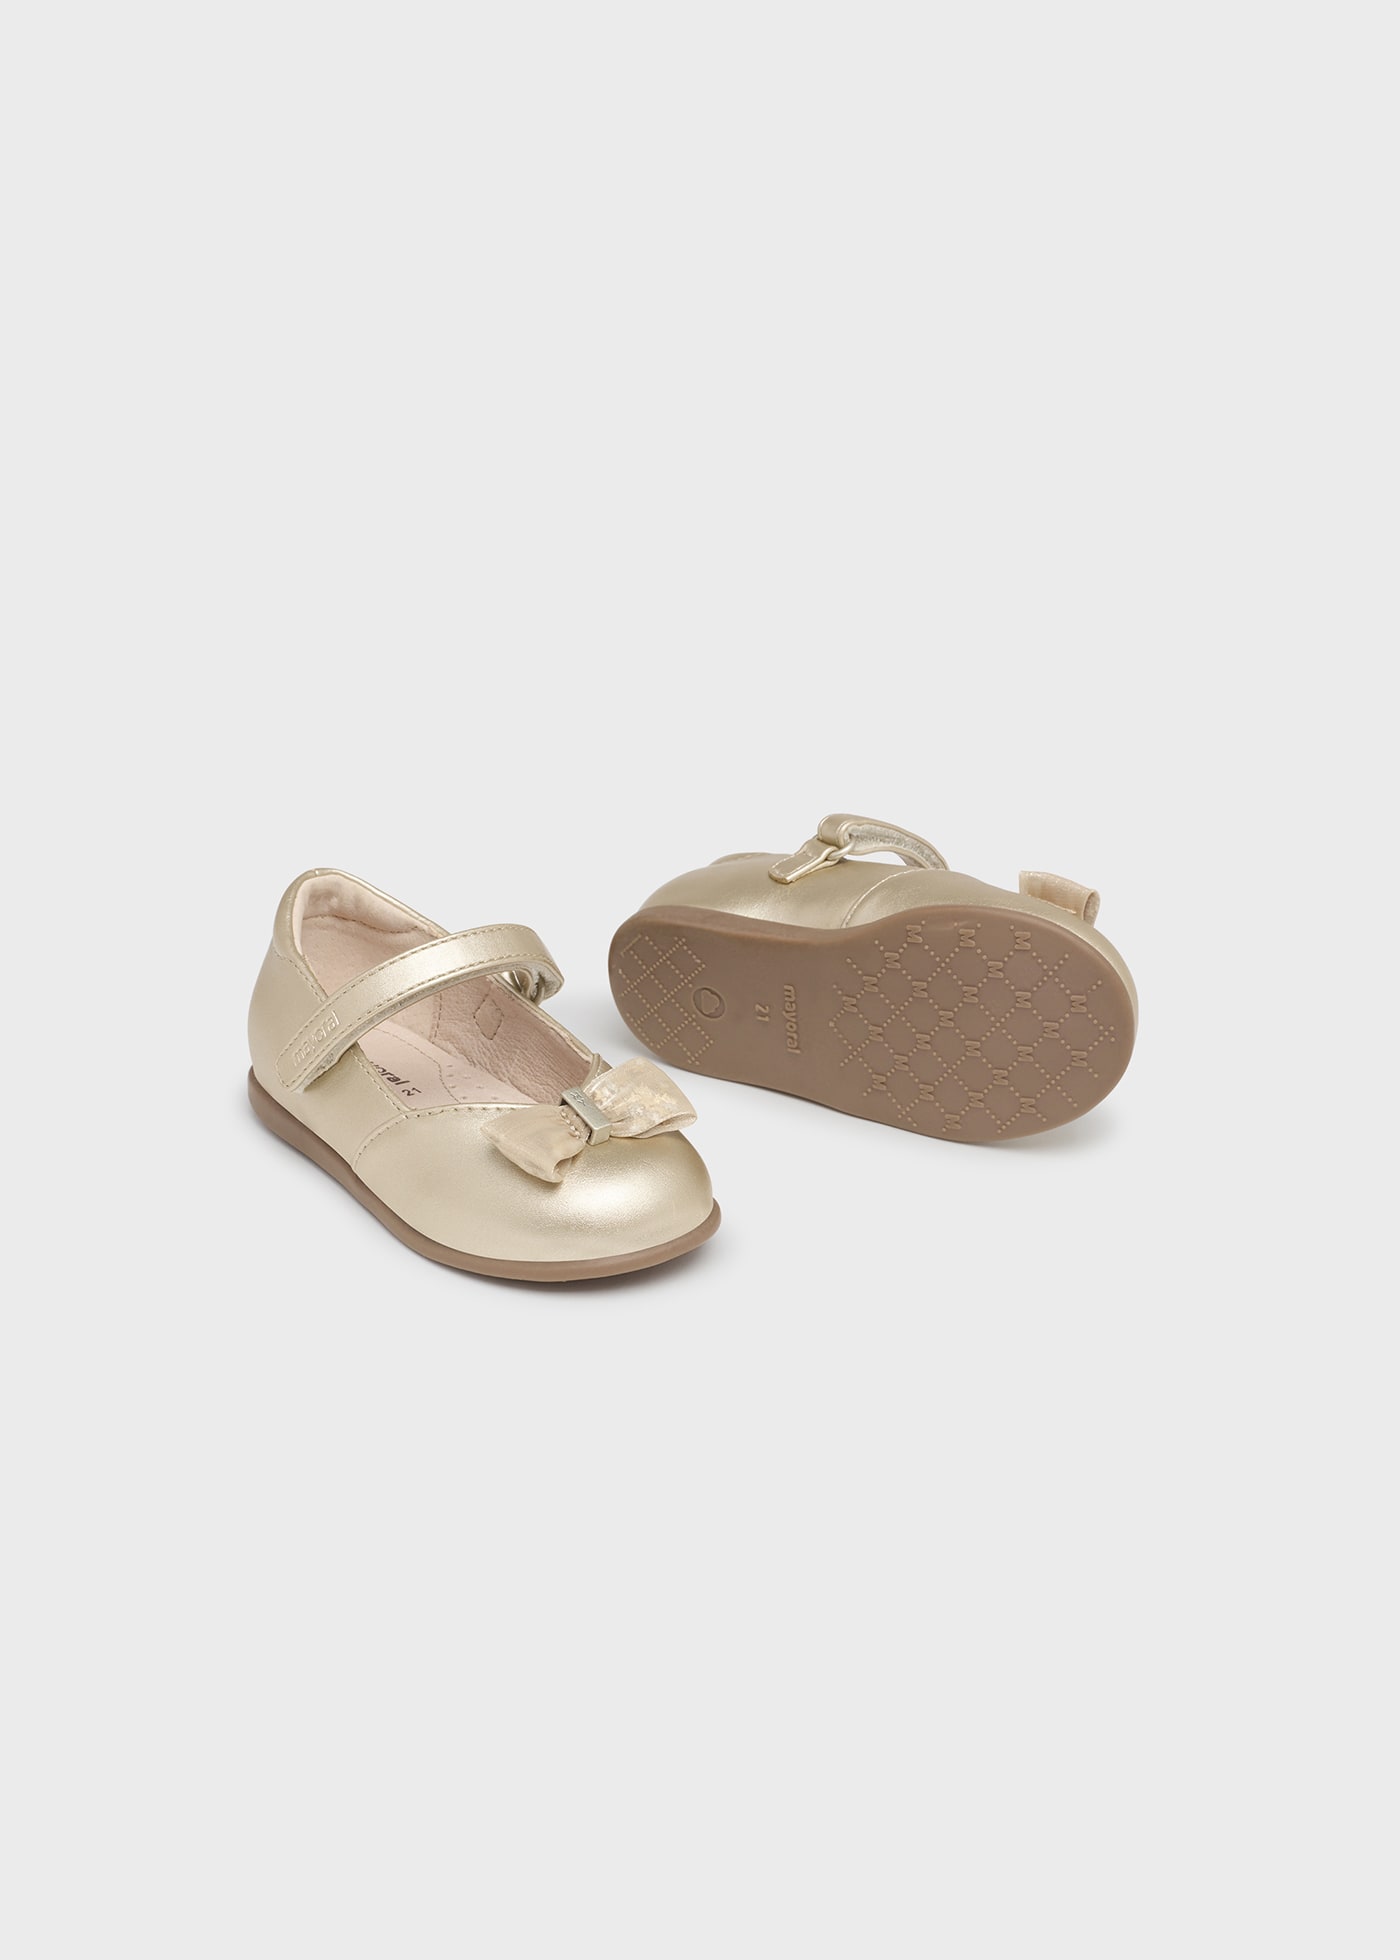 Baby bow ballet flats sustainable leather